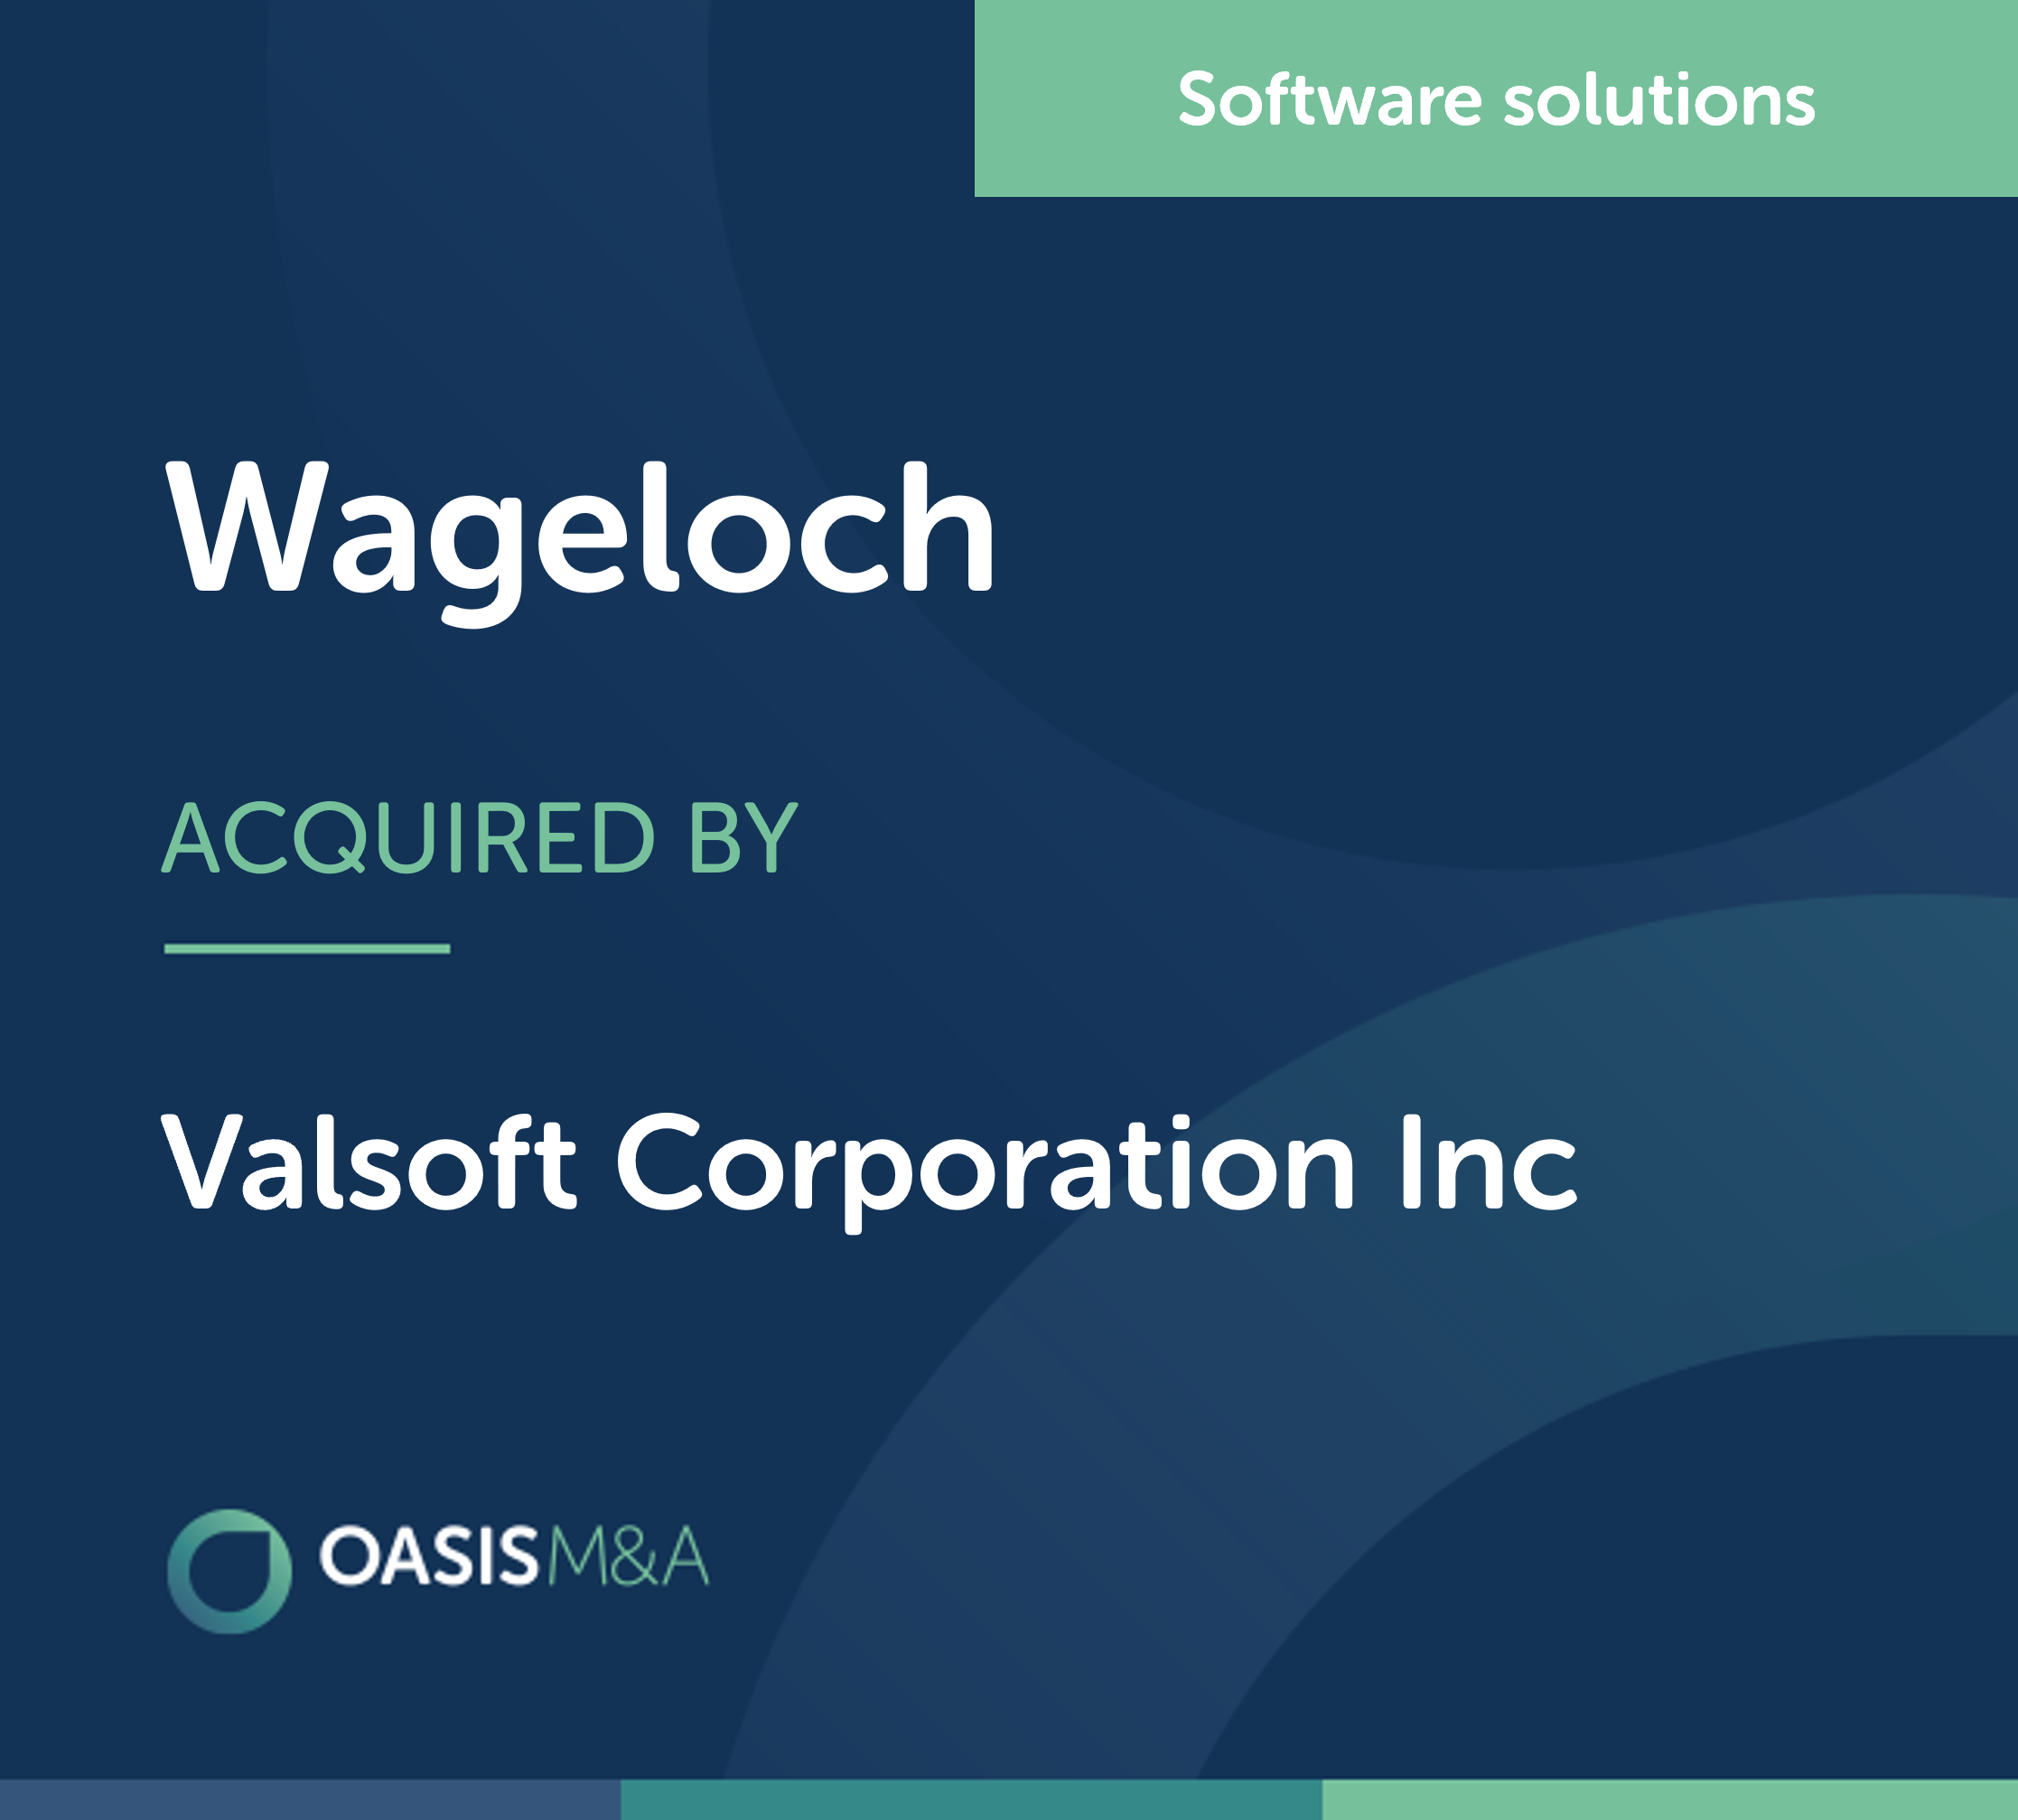 Wageloch acquired by Valsoft Corporation Inc